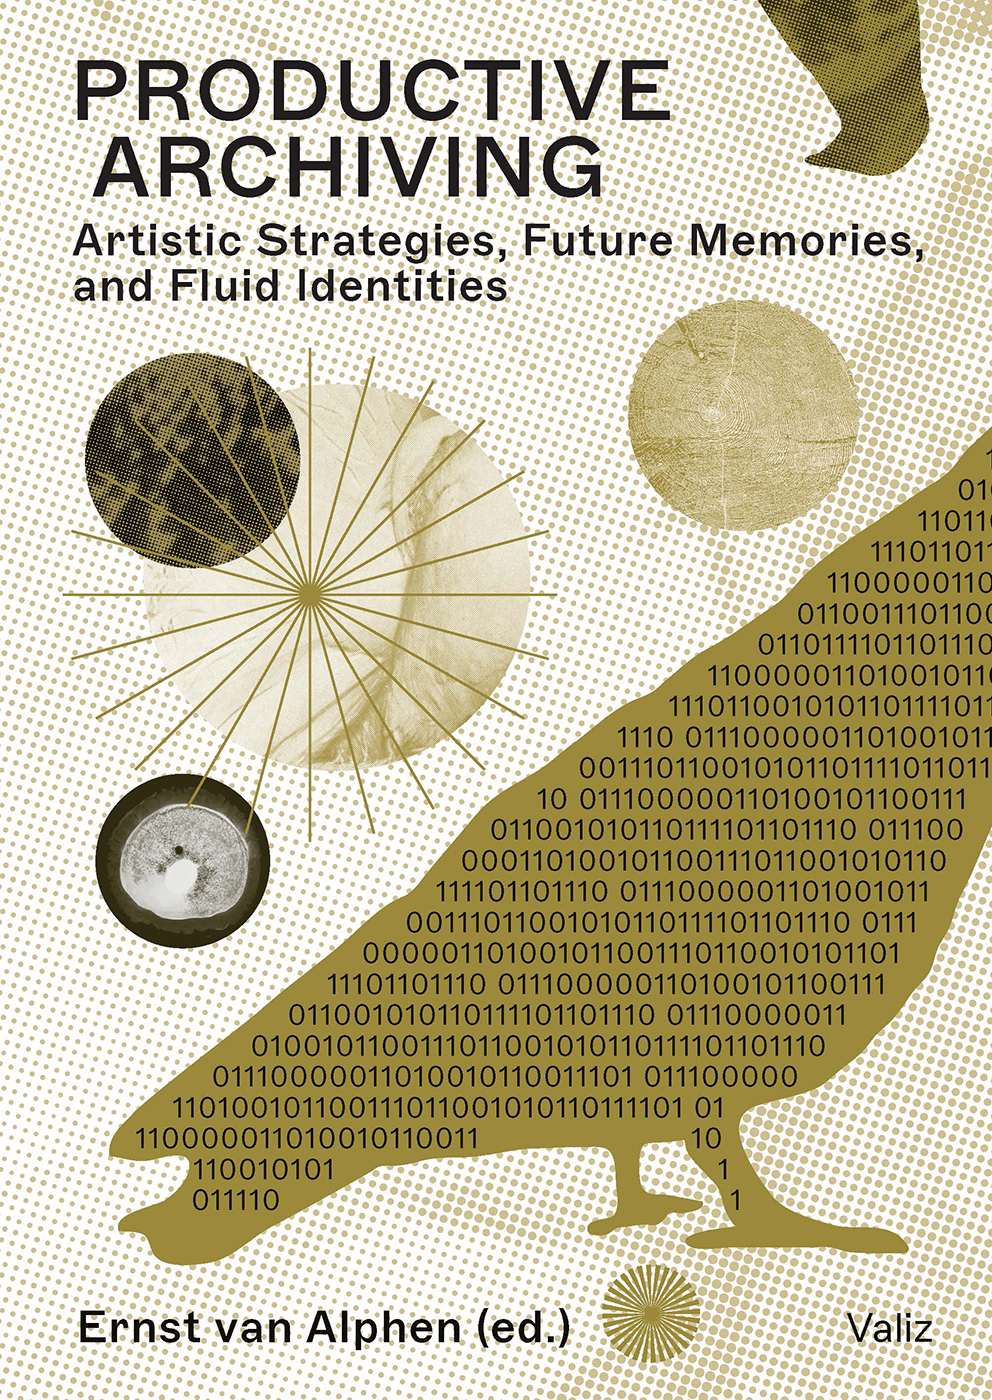 Productive Archiving—Artistic Strategies, Future Memories, and Fluid Identities